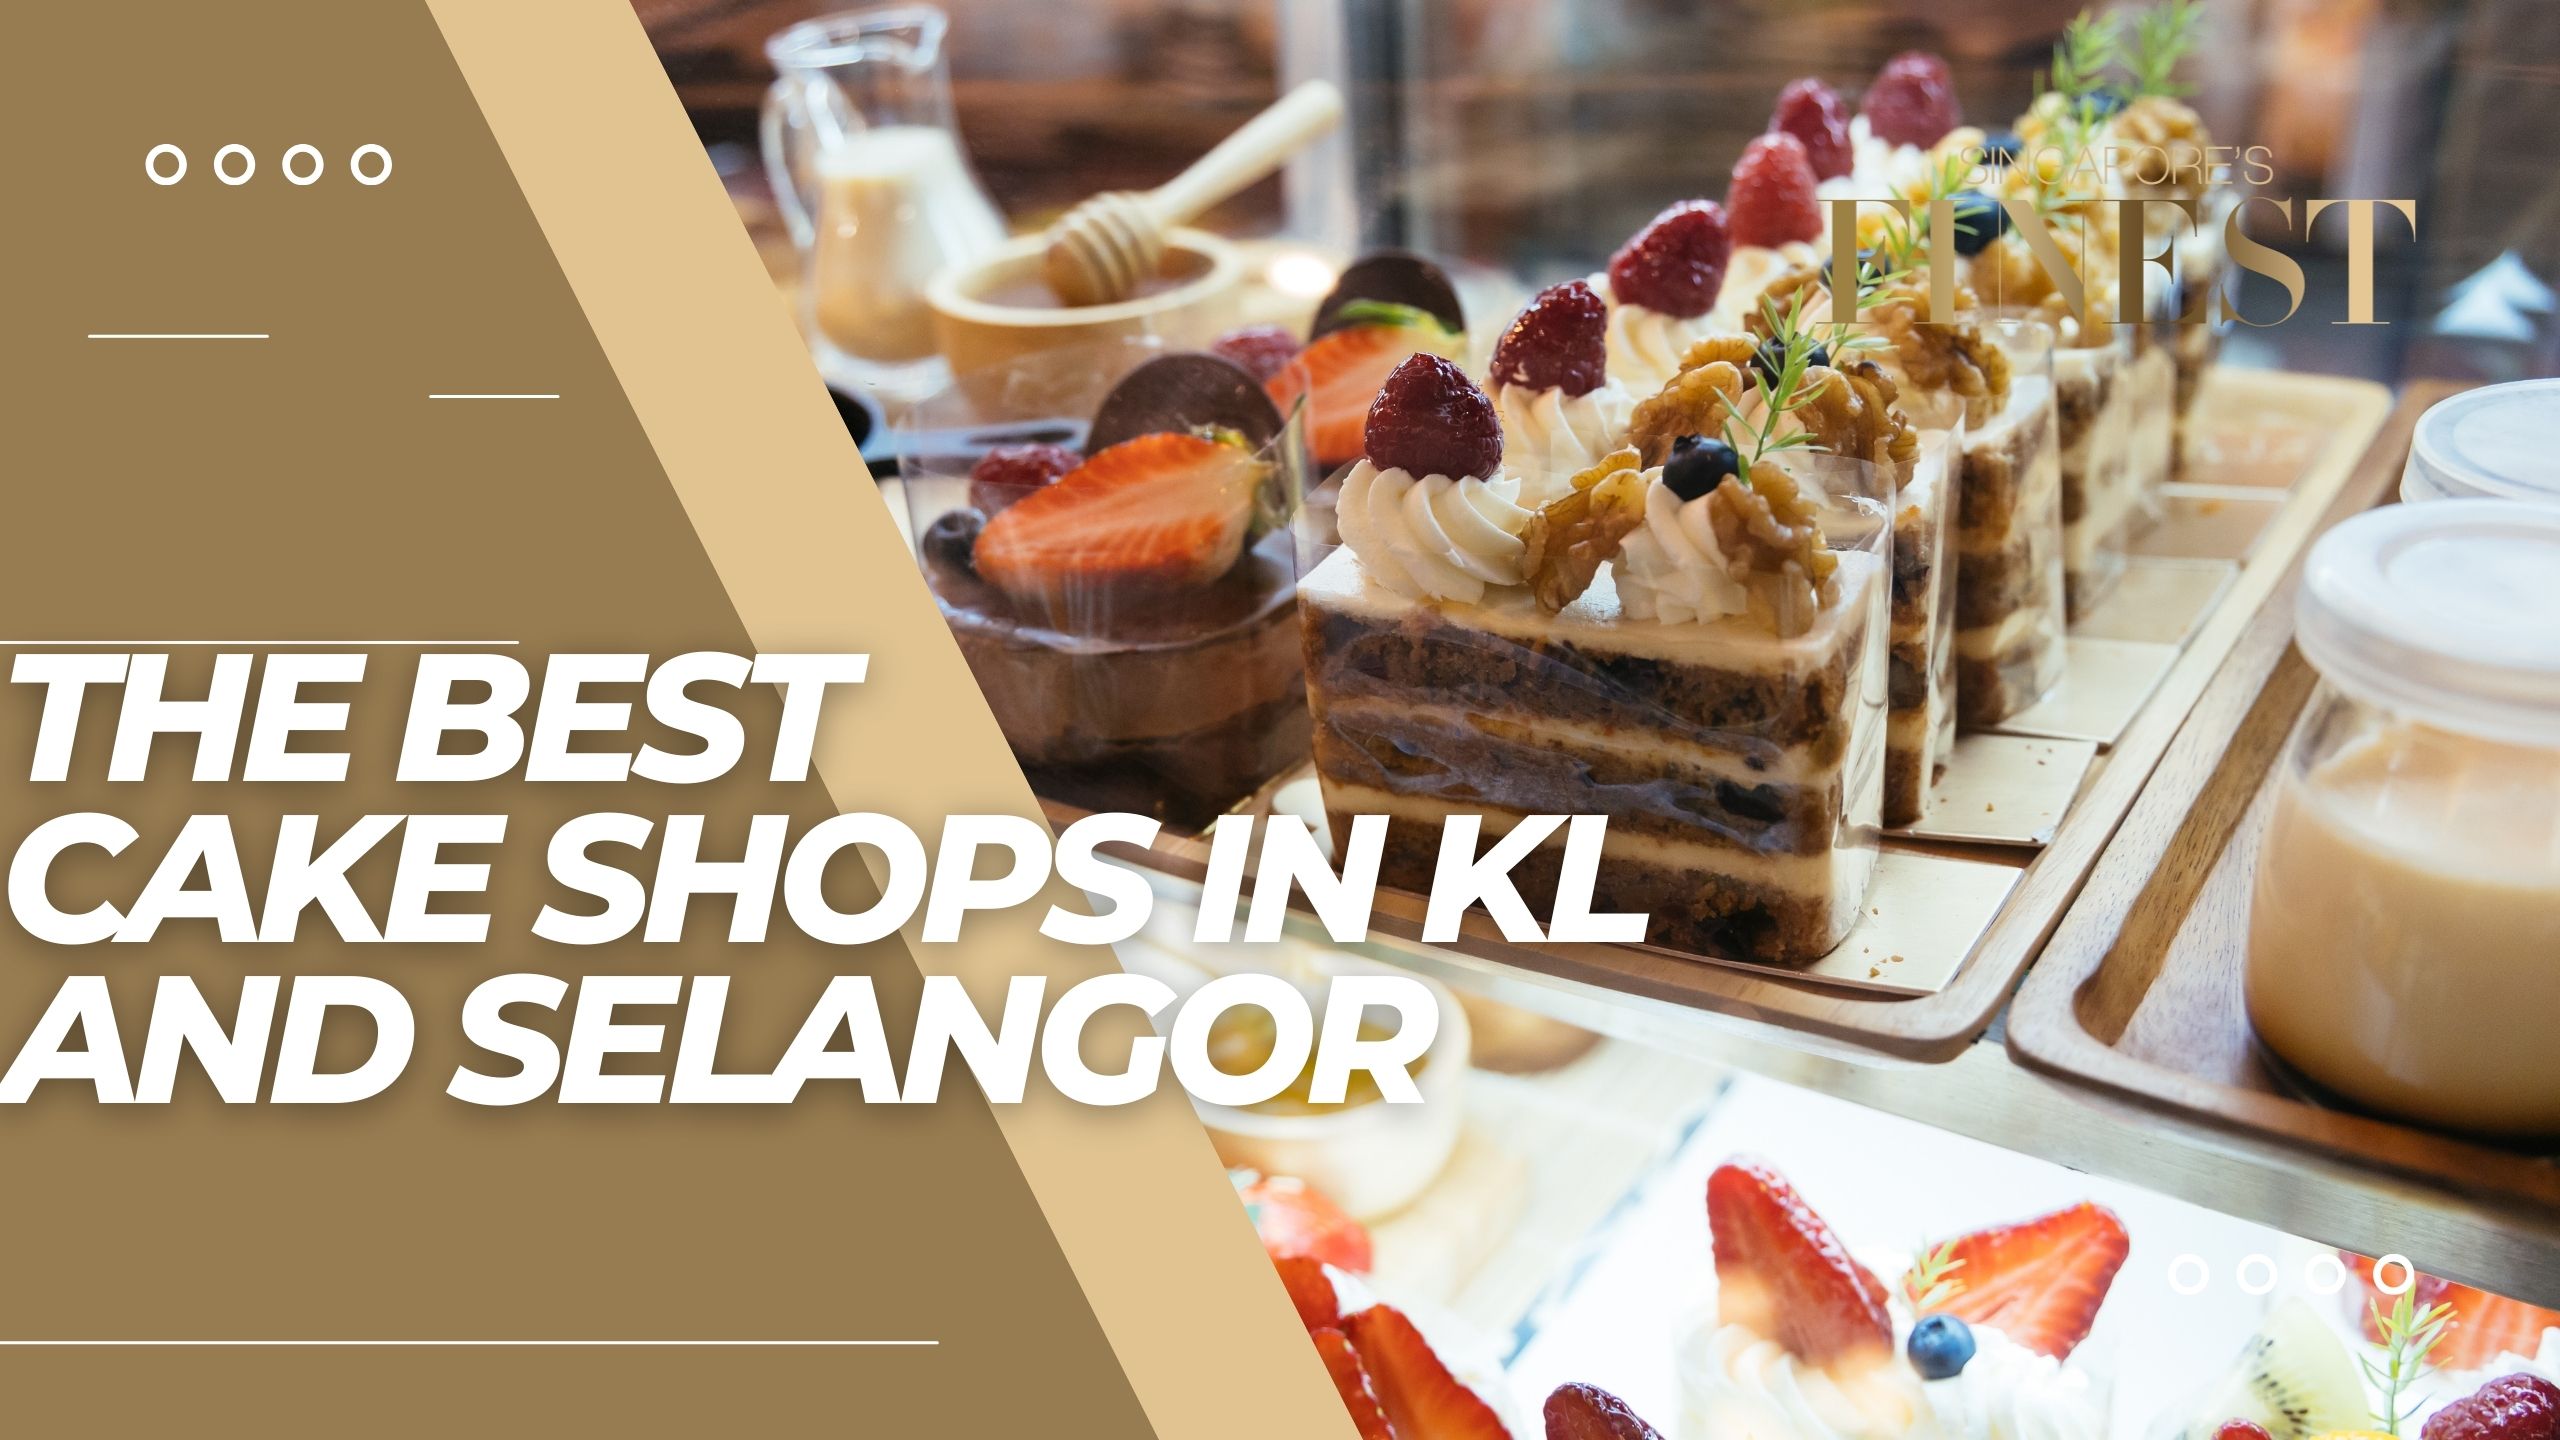 The Finest Cake Shops in KL and Selangor